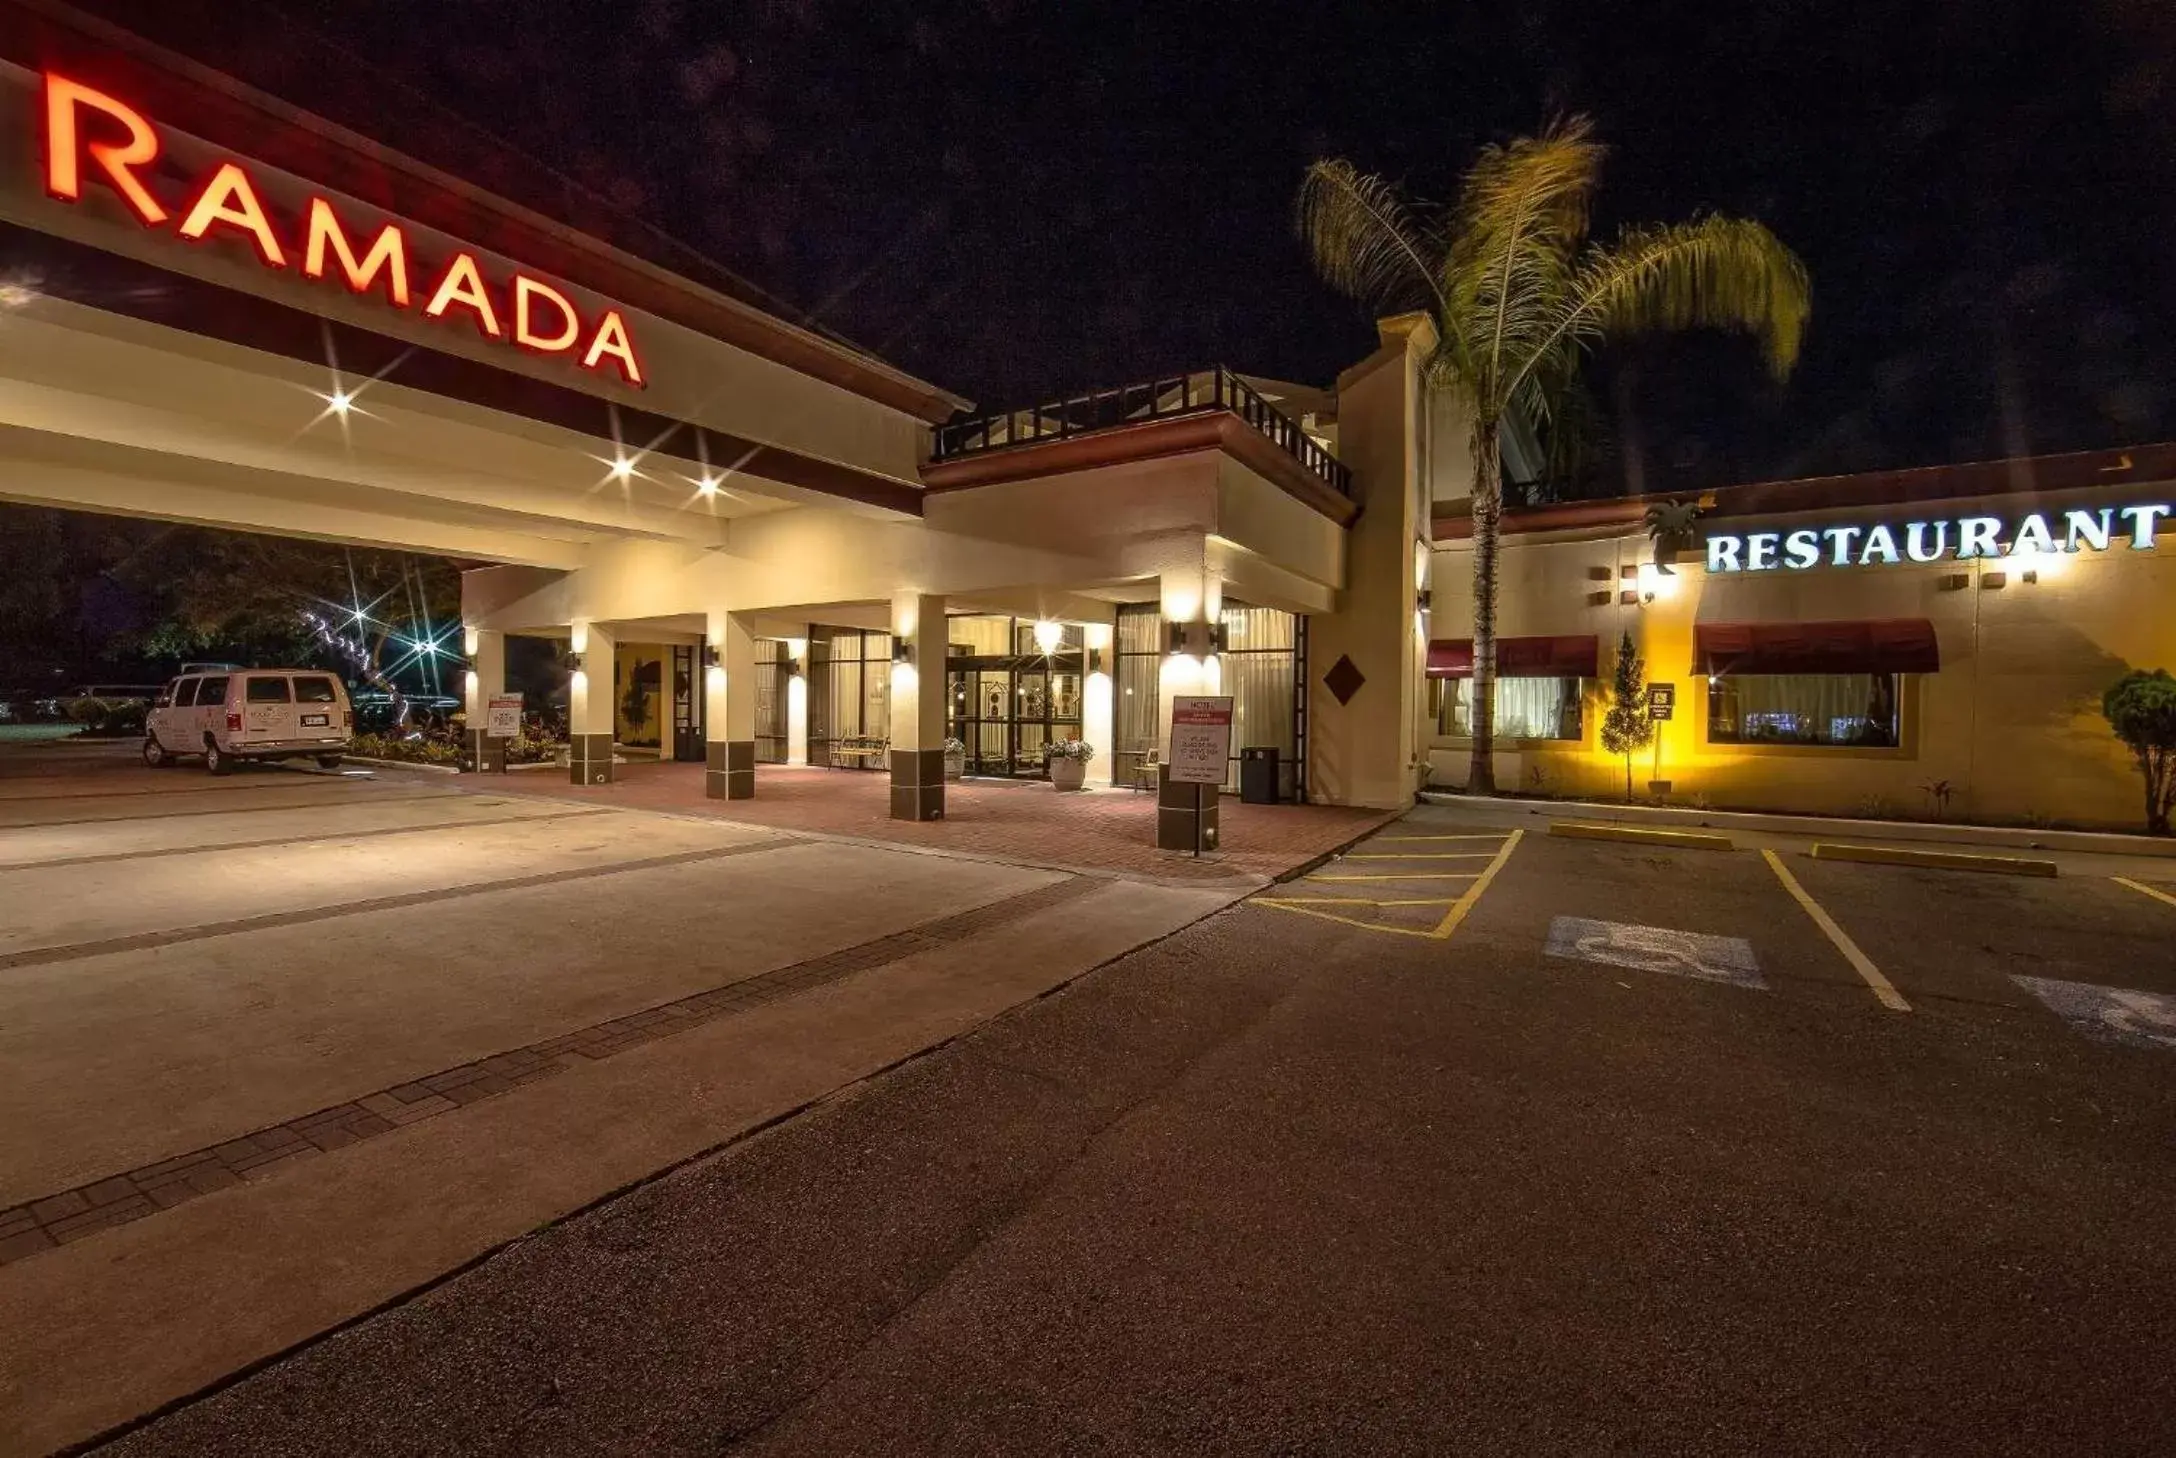 Property Building in Ramada by Wyndham Houston Intercontinental Airport East